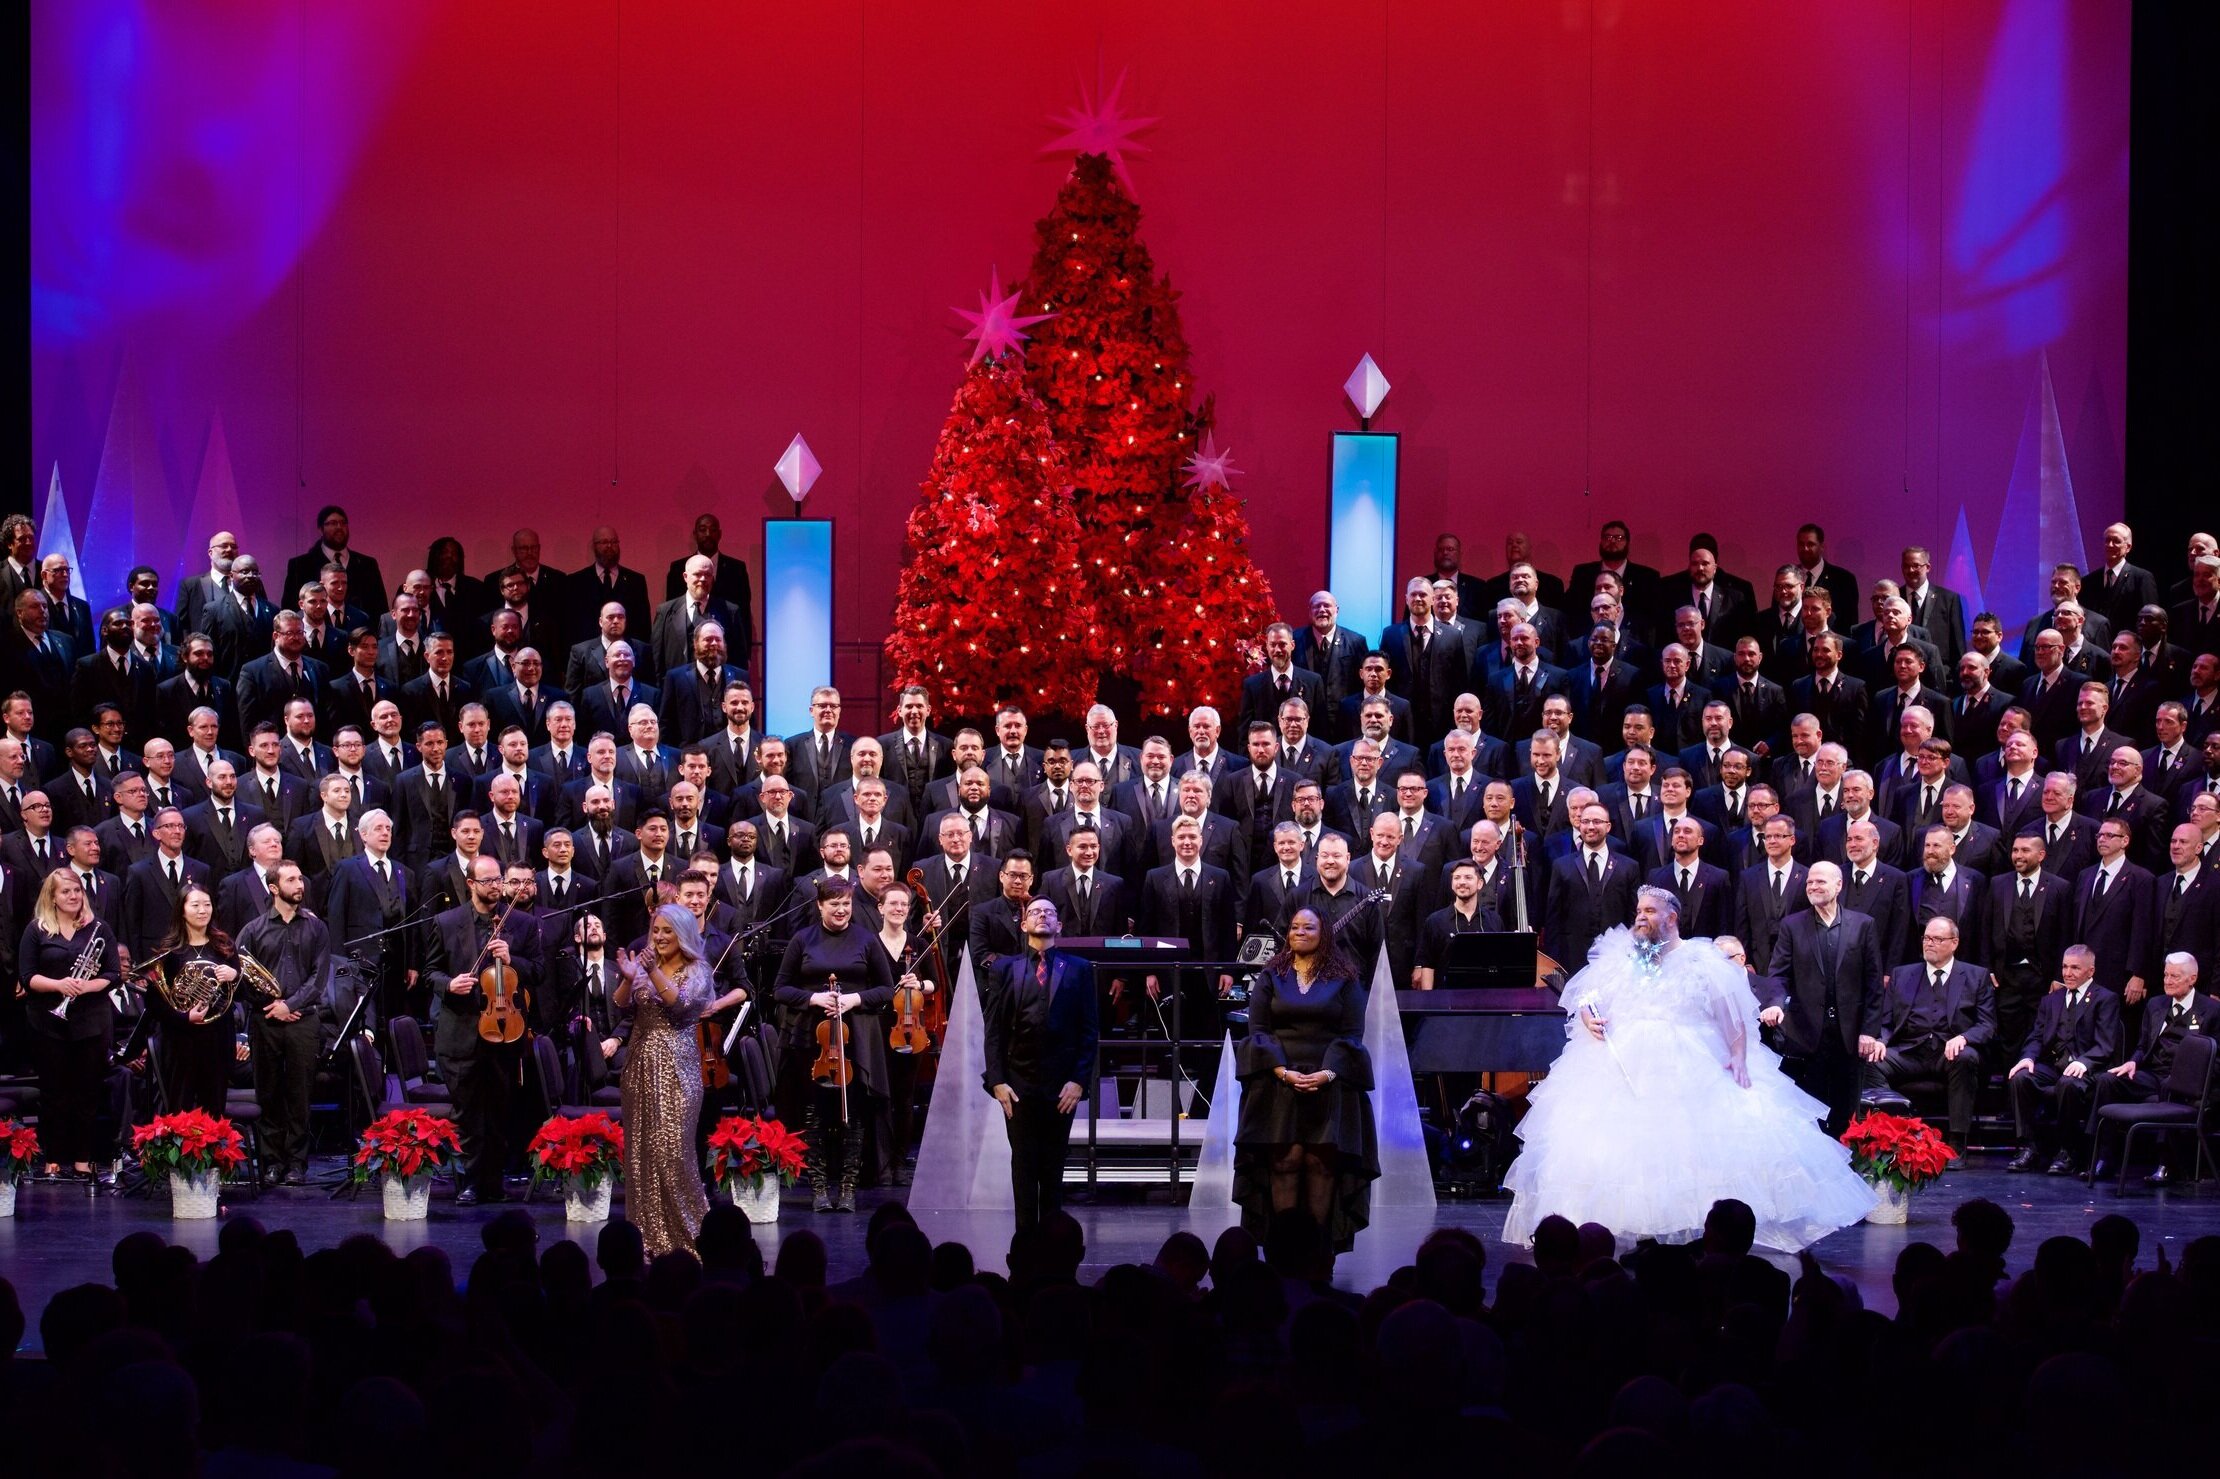 The Turtle Creek Chorale during their holiday performance in 2019.